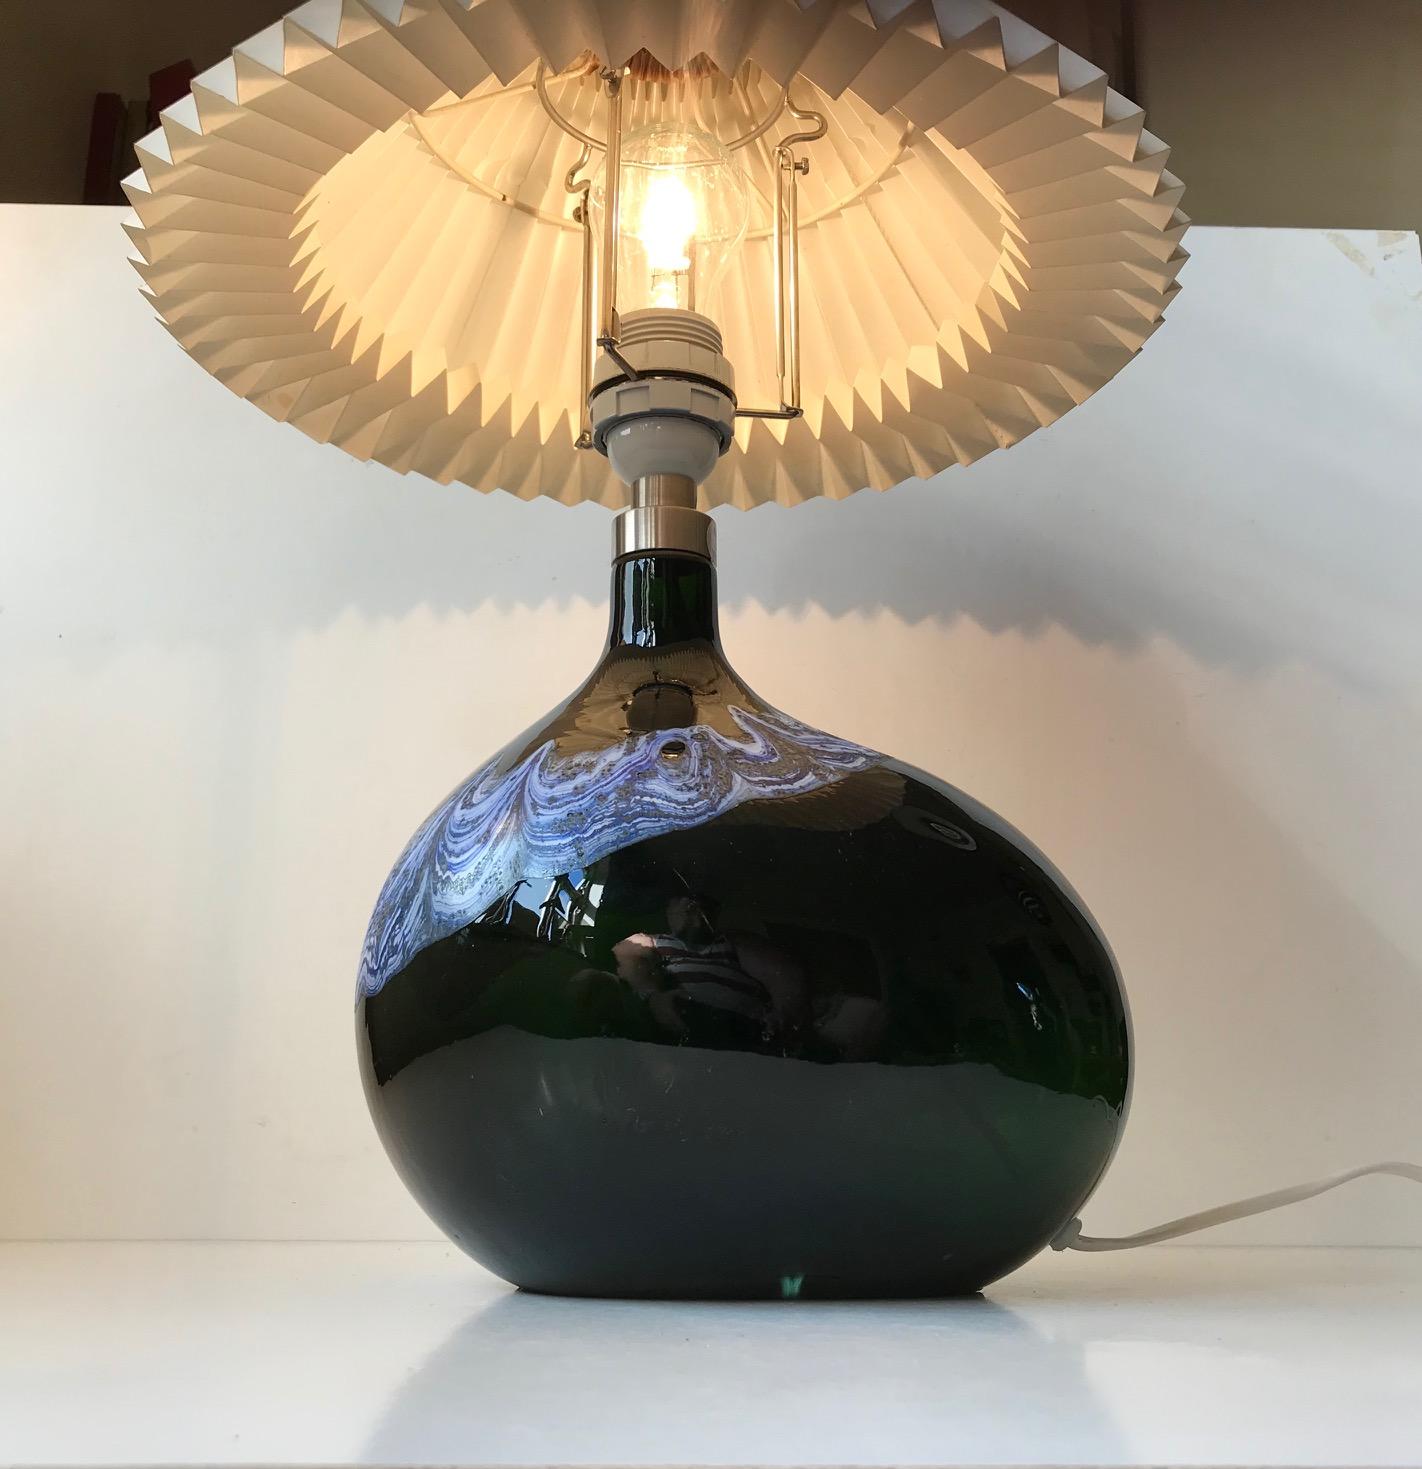 Rare freeform black art glass table lamp designed by Michael Bang and manufactured by Holmegaard in Denmark only from 1973-1976. It is decorated with wavy blue and white enamel applied by hand and therefore unique to this light. This model is called